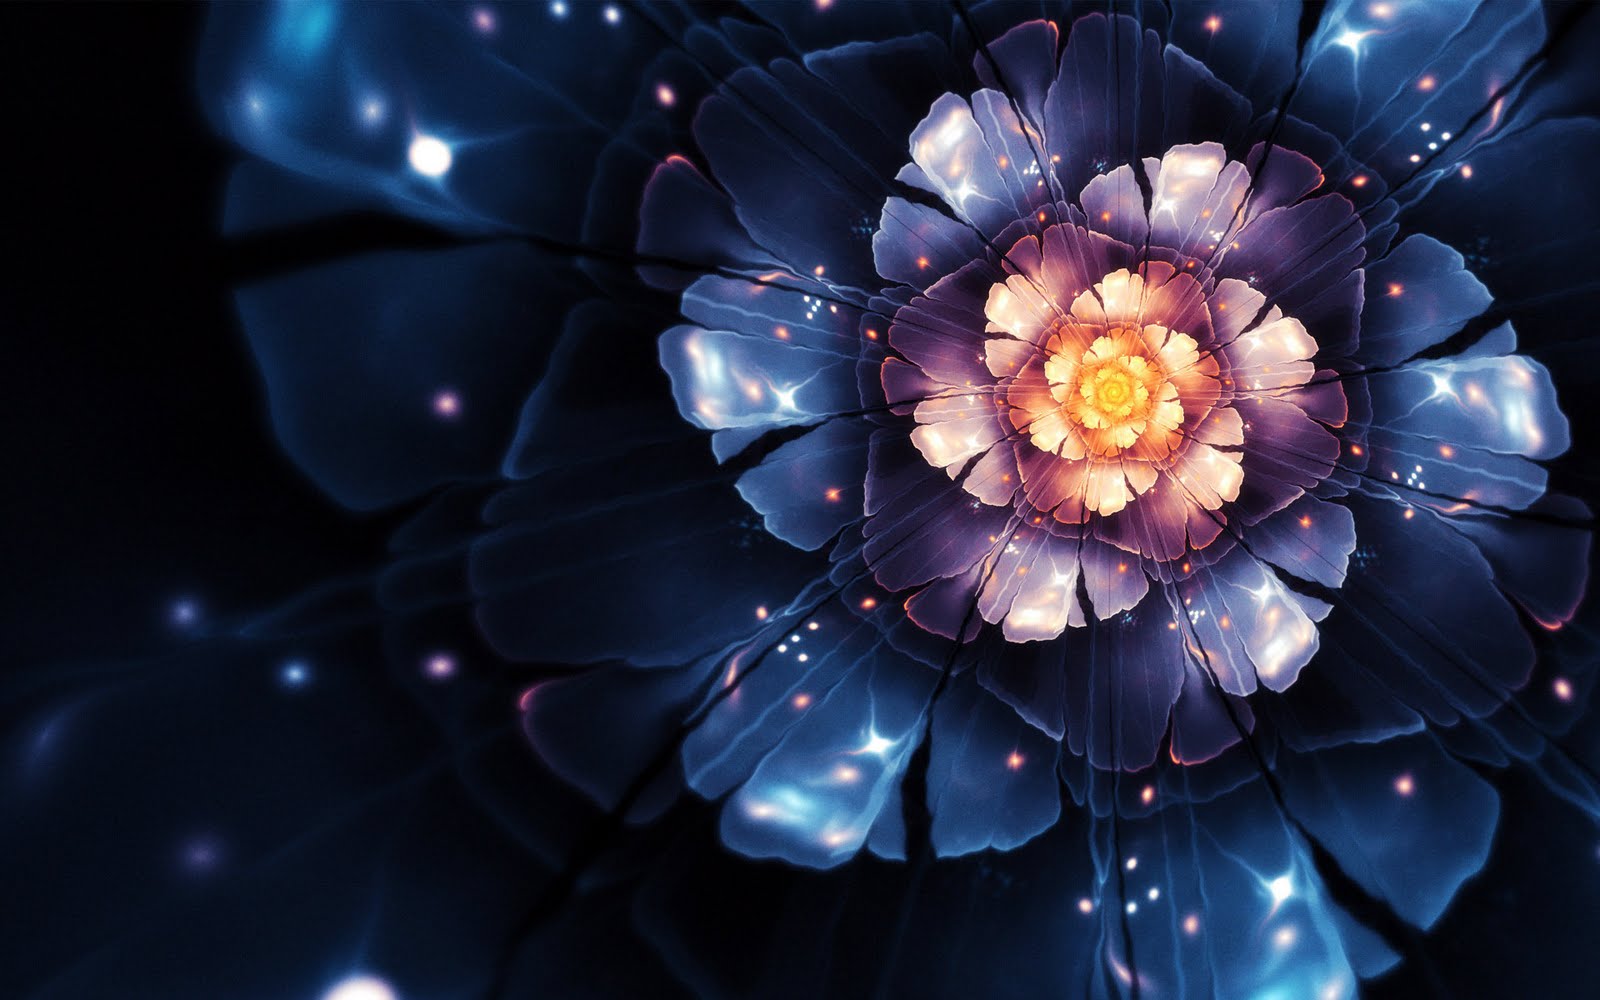 Flower 3D Design Wallpaper here you can see Best Colorful Flower 3D